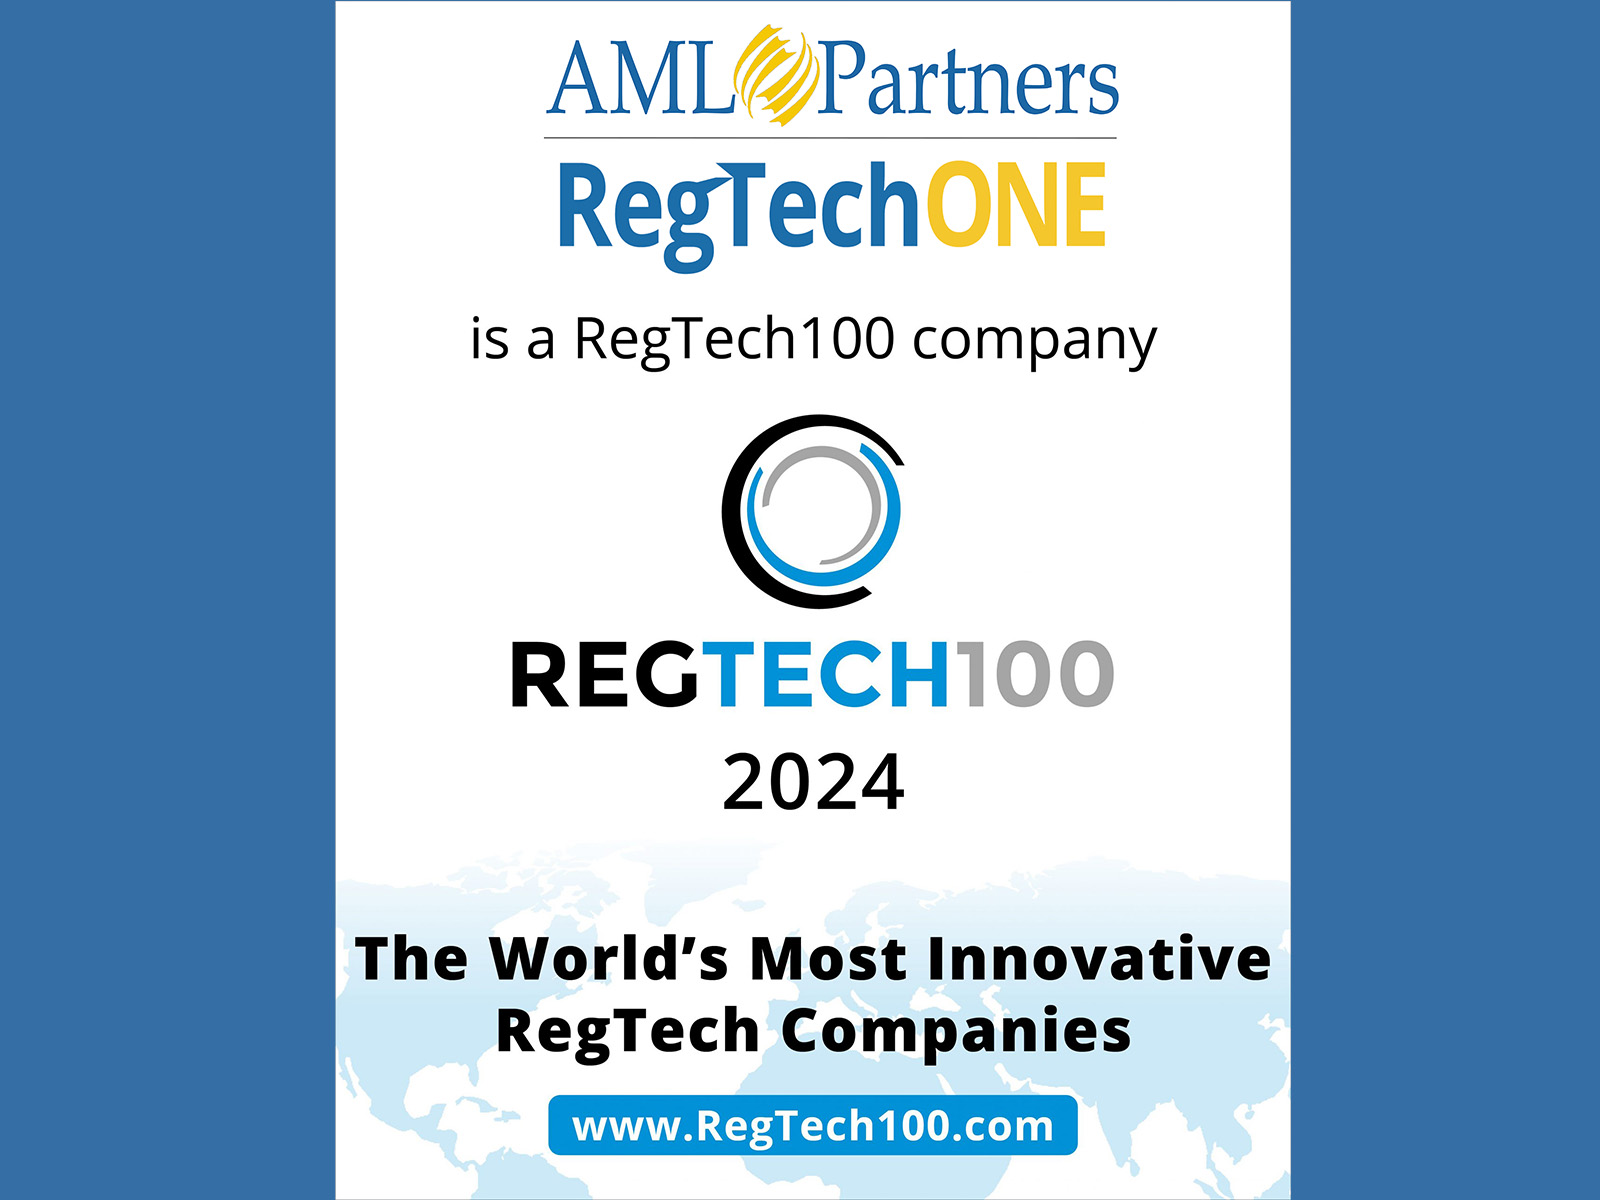 Image shows RegTech100 award for AML Partners and RegTechONE platform for AML and GRC. RegTechONE is peak innovation in AML platform for AML Compliance, KYC CDD, GRC, Screening, and more.